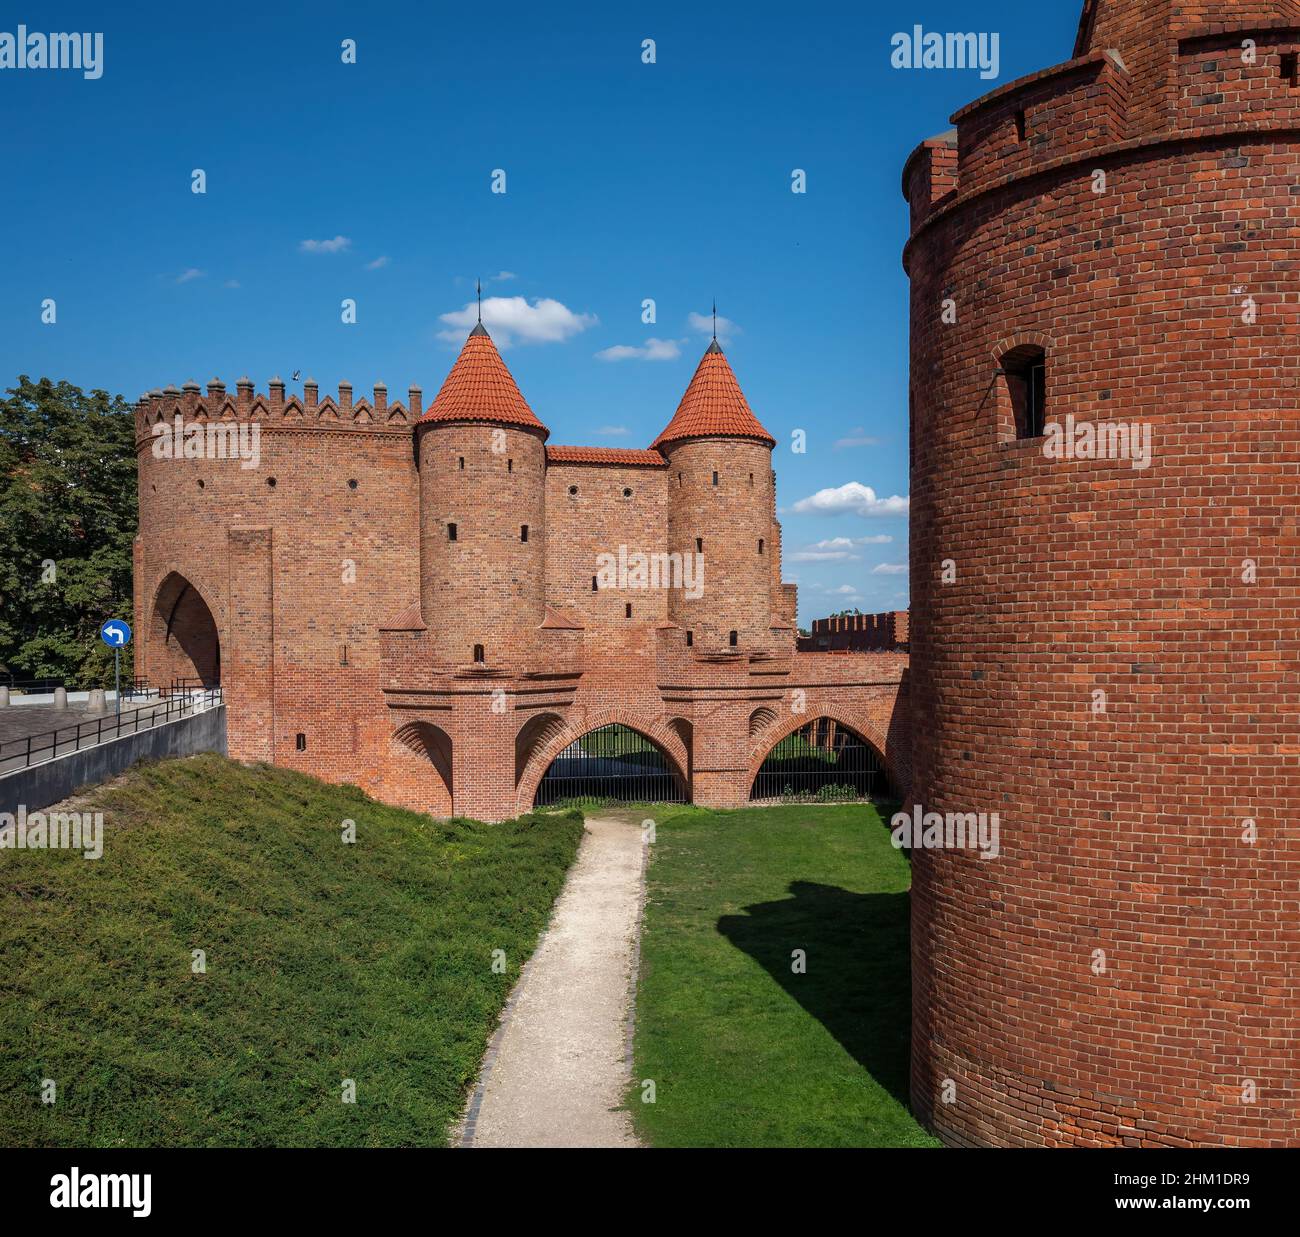 Warsaw Barbican - fortification of the old citty walls - Warsaw, Poland Stock Photo